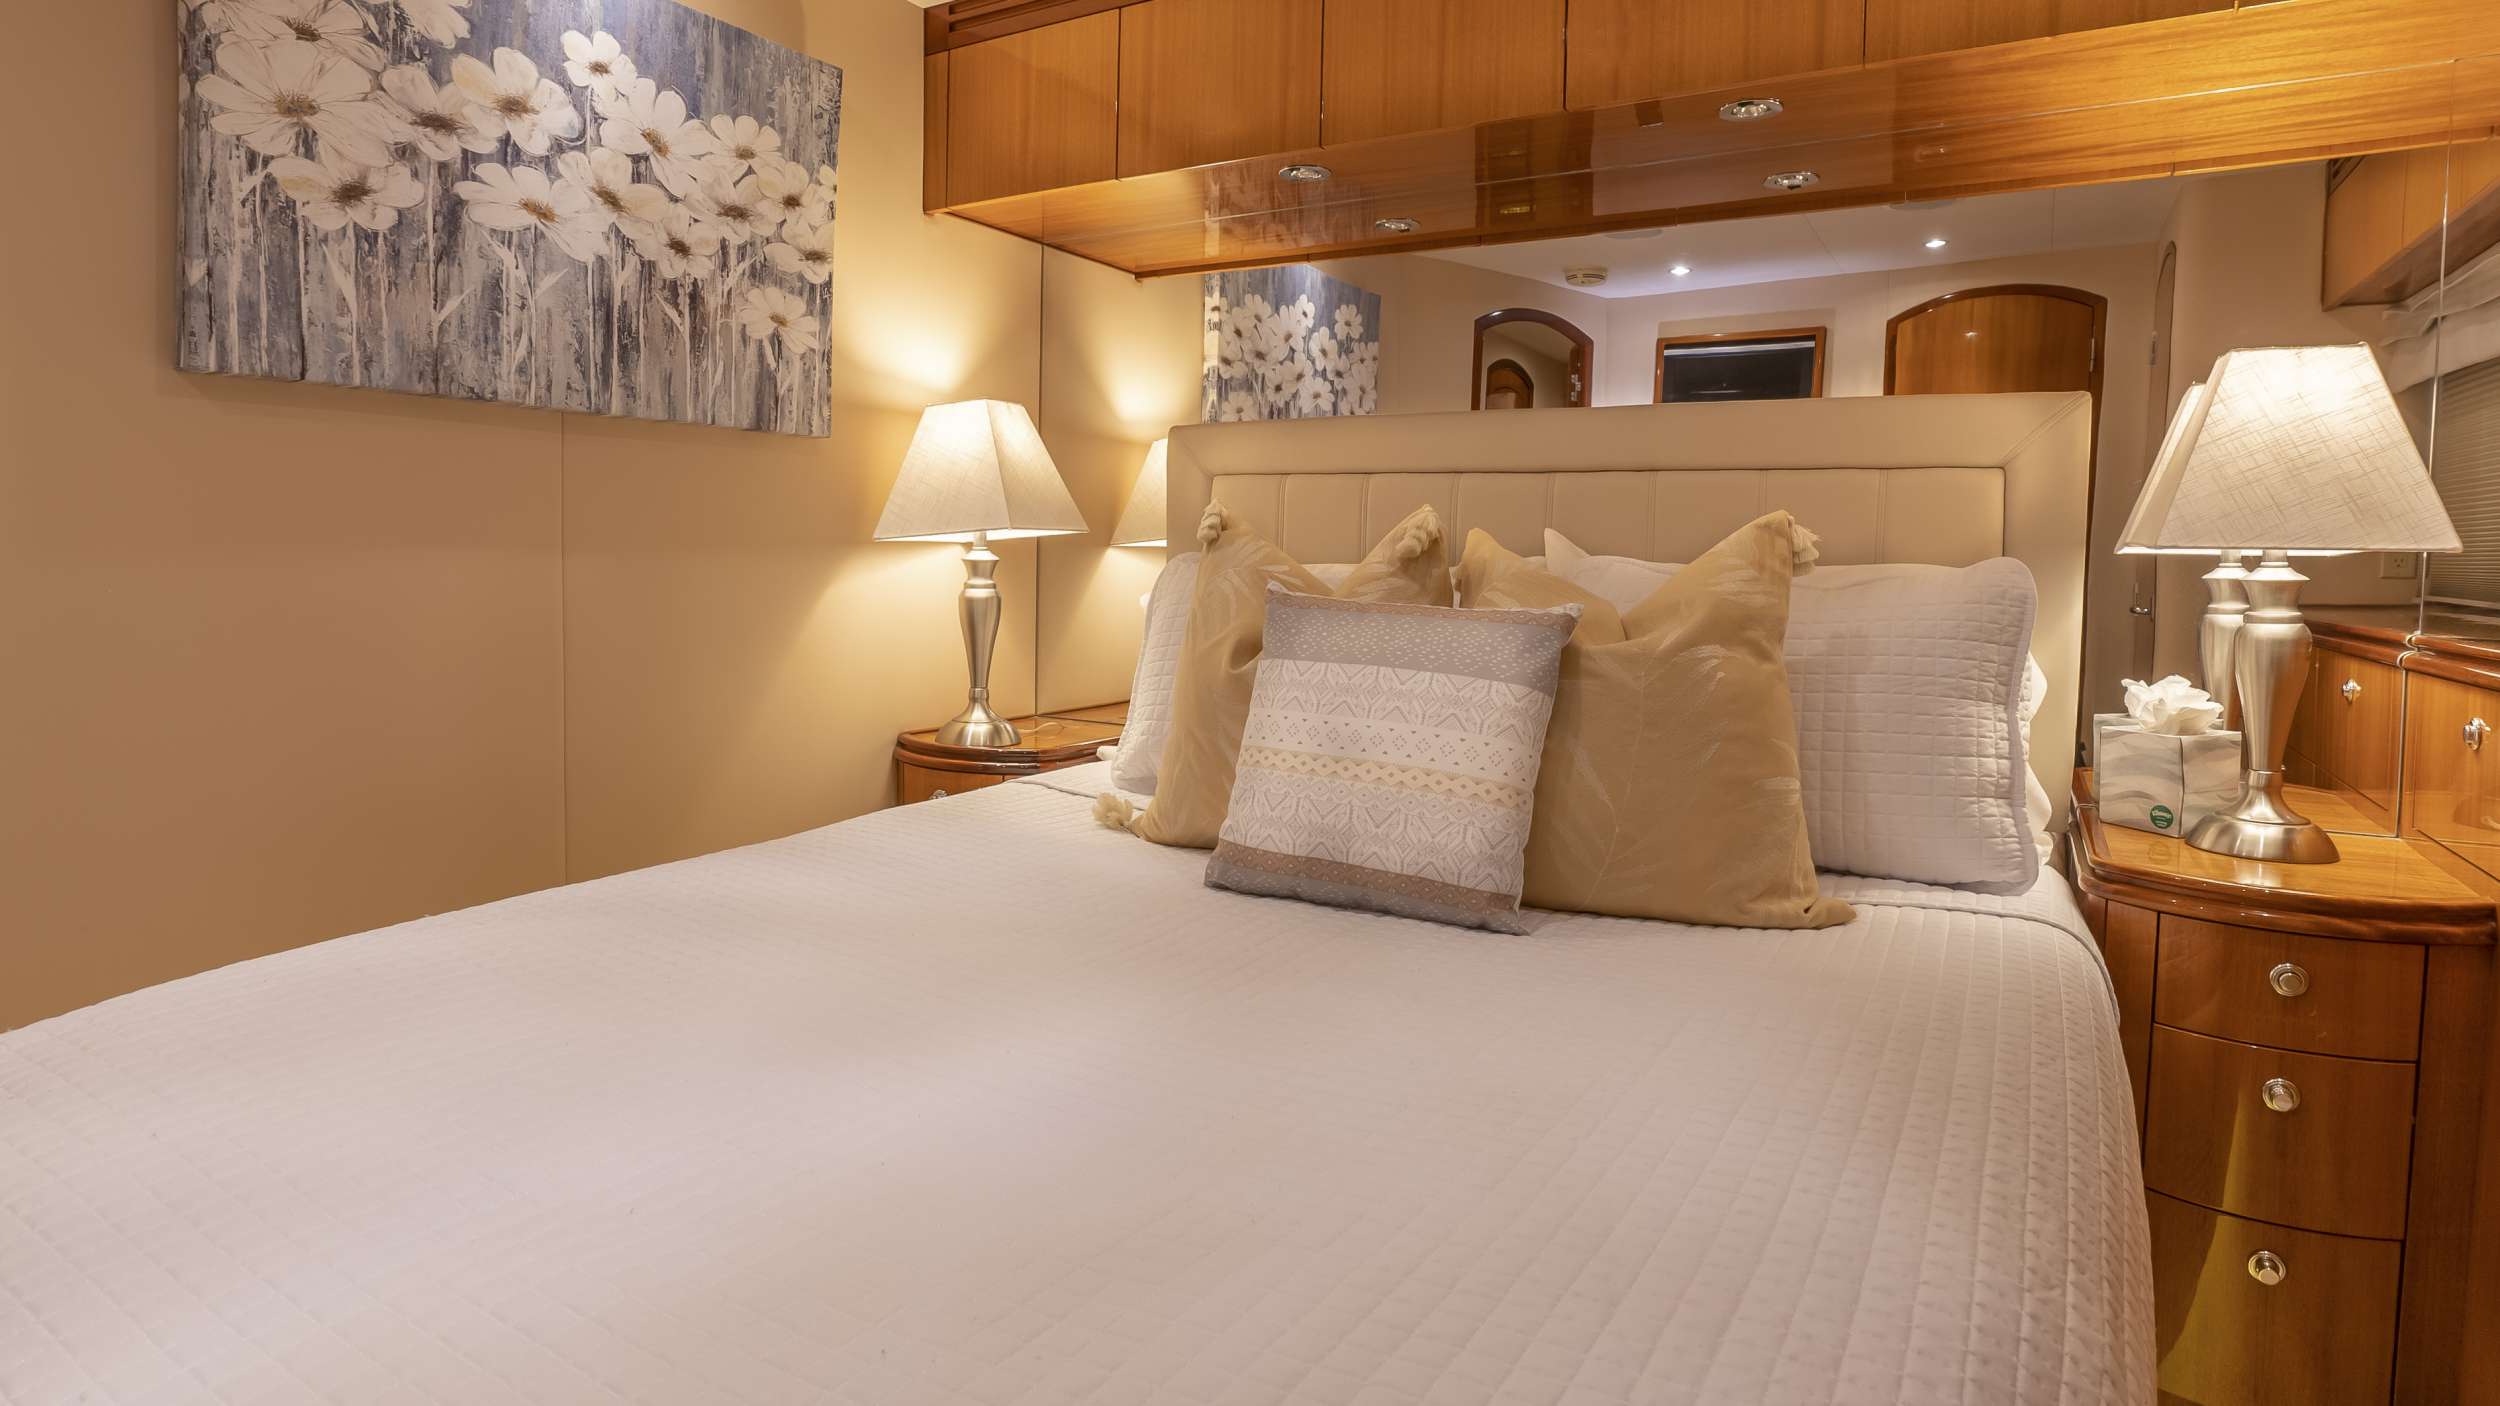 GALLOPIN Yacht Charter - Guest Stateroom